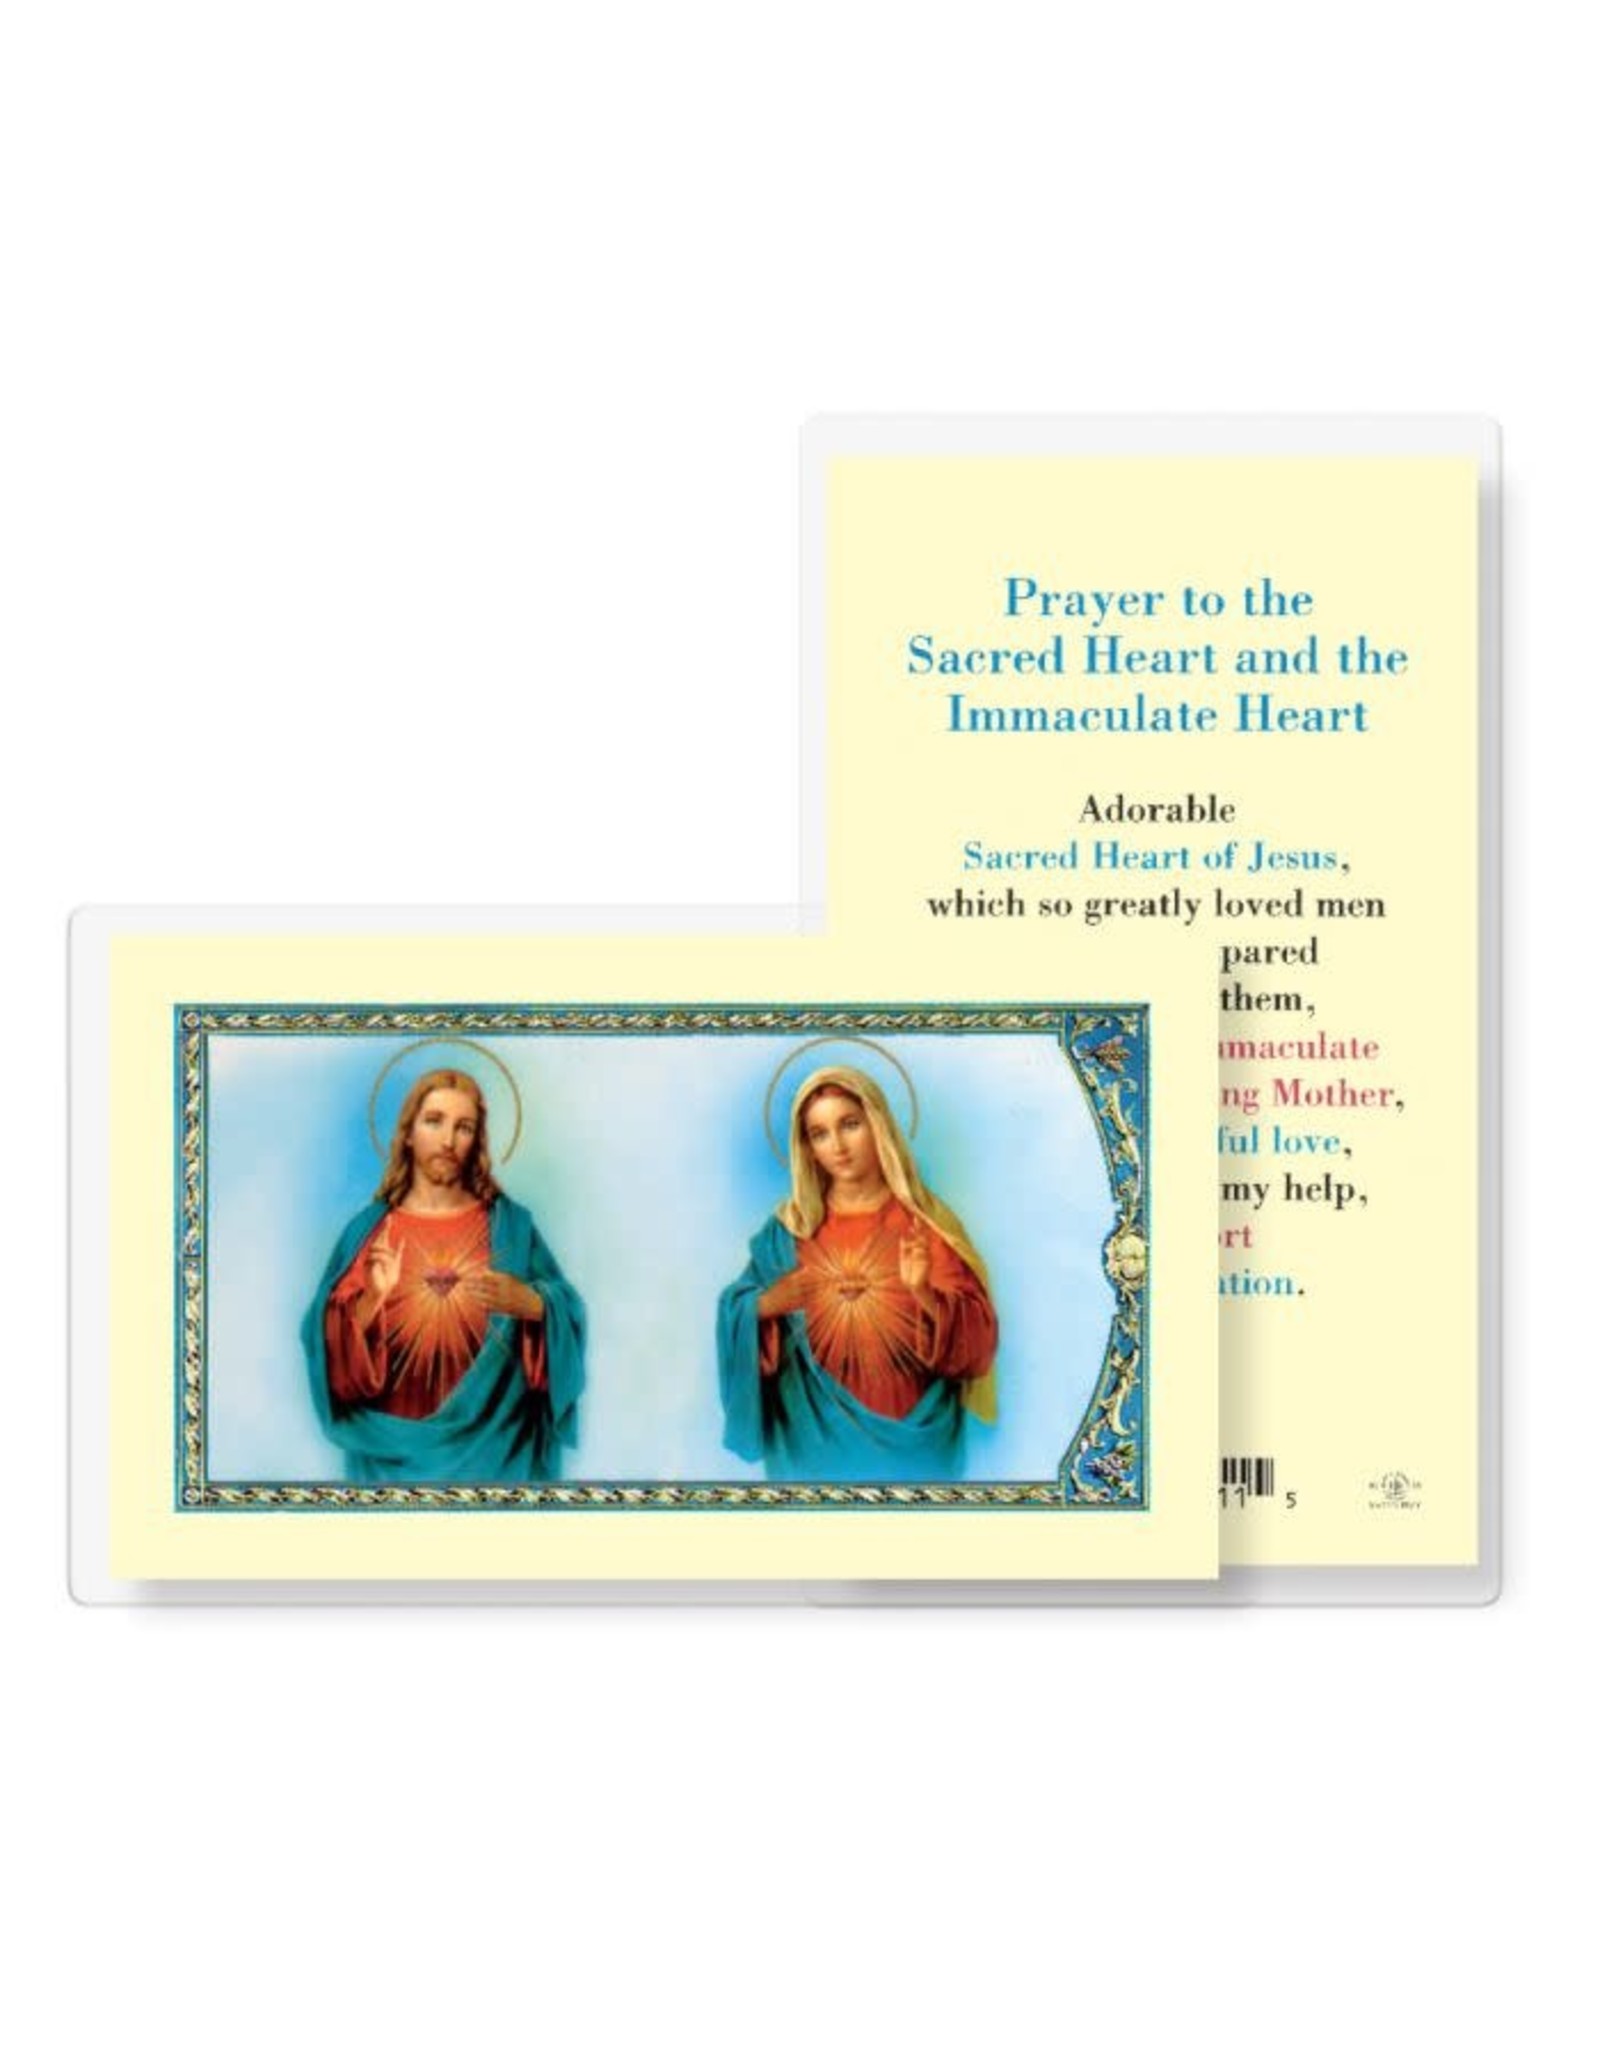 Hirten Holy Card, Laminated - Prayer to Sacred Heart of Jesus and Immaculate Heart of Mary